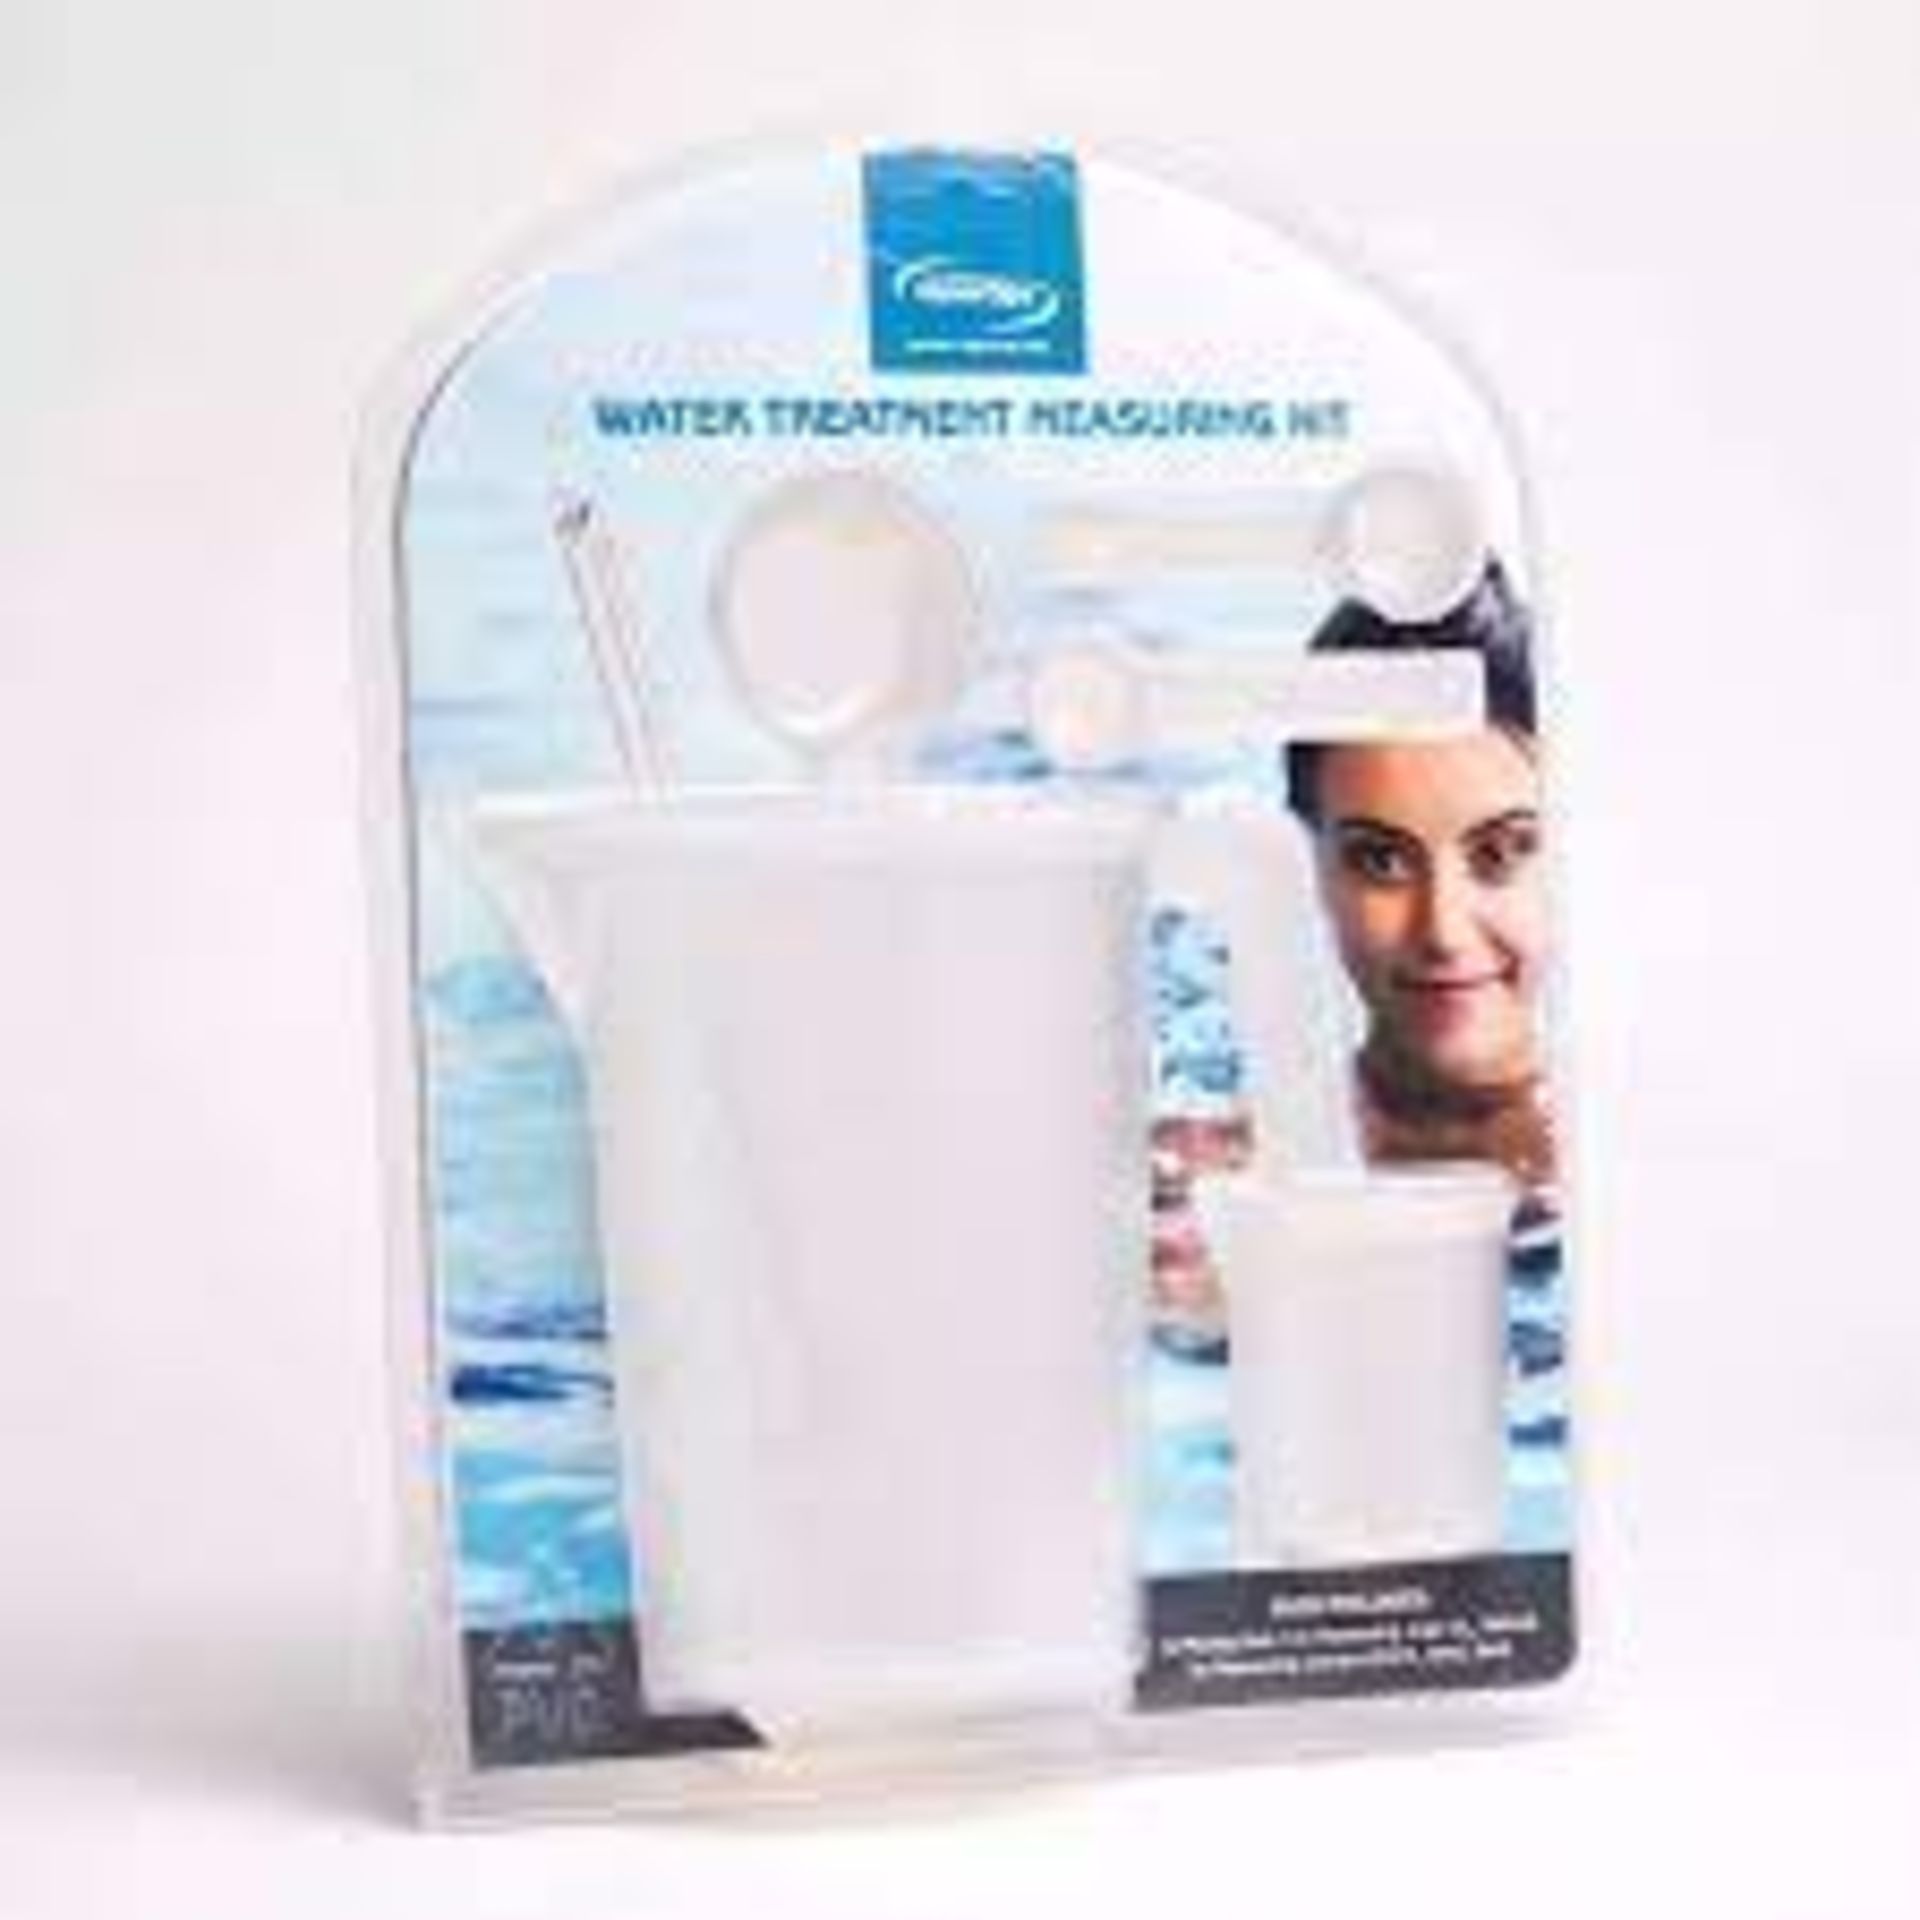 50 X New Packaged CLEVERSPA® MEASURING SET. (ROW10) Ideal for measuring hot tub and swimming pool